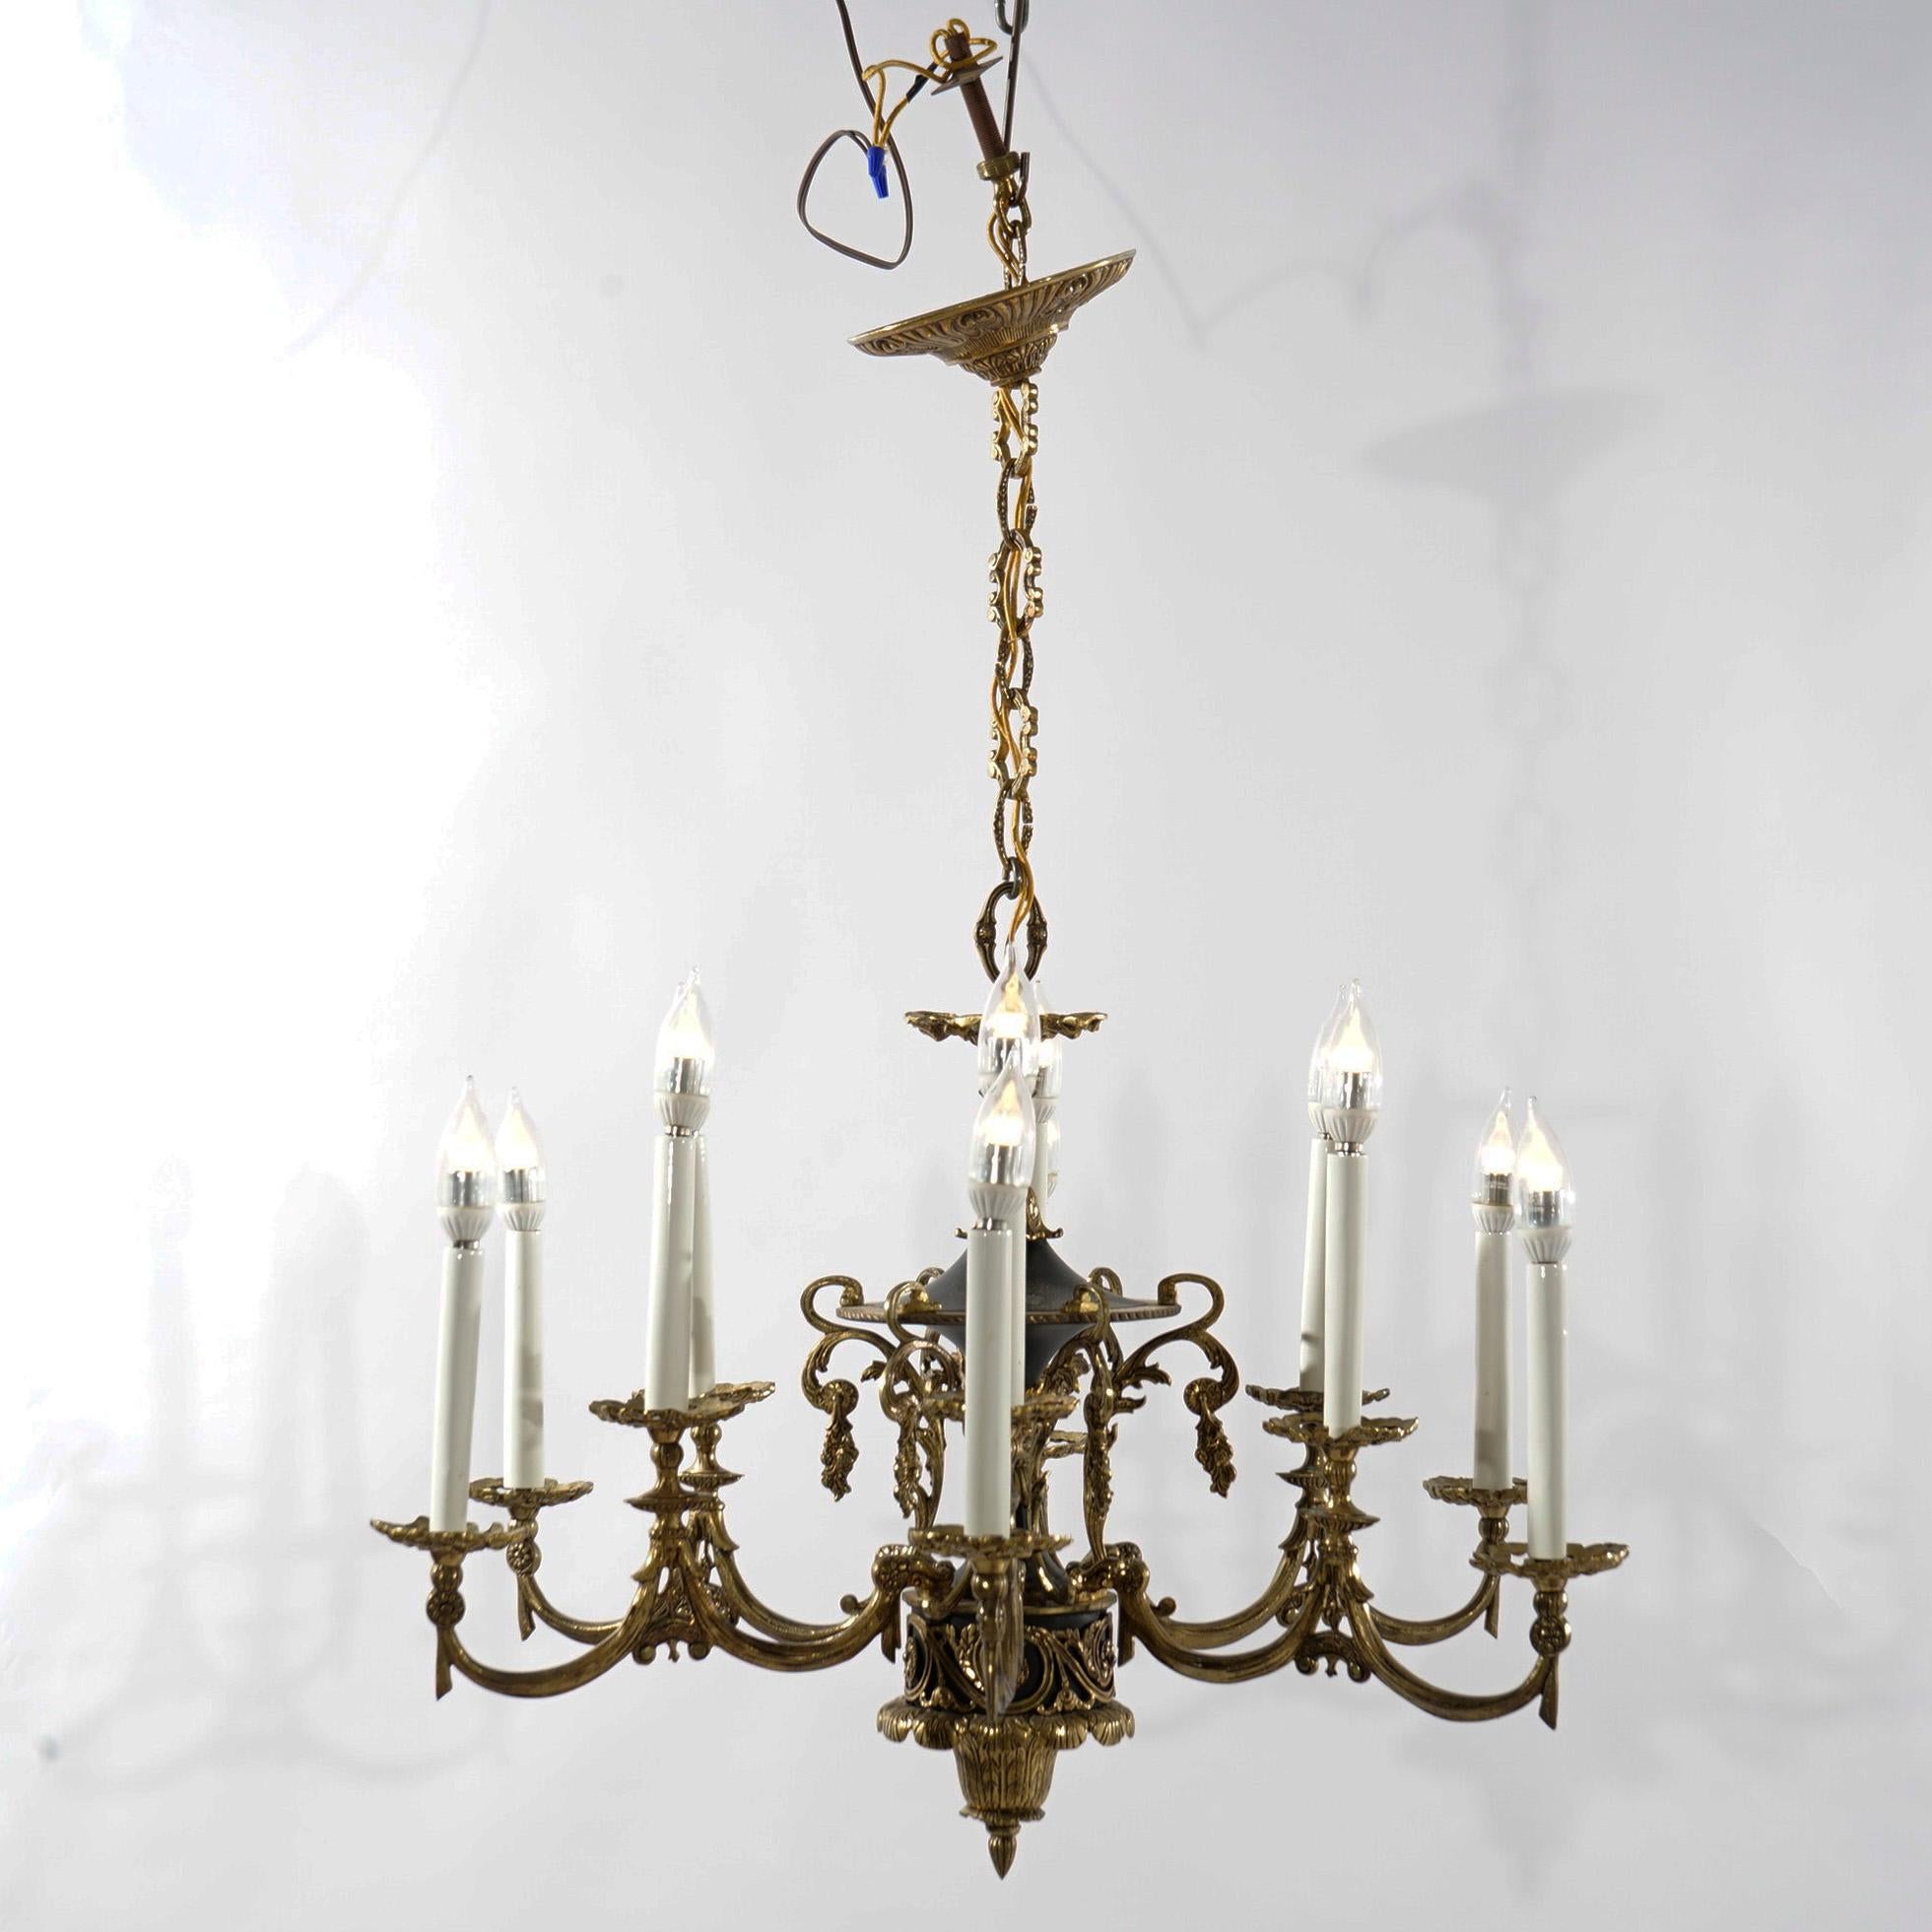 An antique Classical French Empire style chandelier offers cast bronze construction with ebonized bodice having twelve foliate form scroll arms terminating in candle lights, early 20th century

Measures- 34.5''H x 28''W x 28''D; 9'' drop

Catalogue